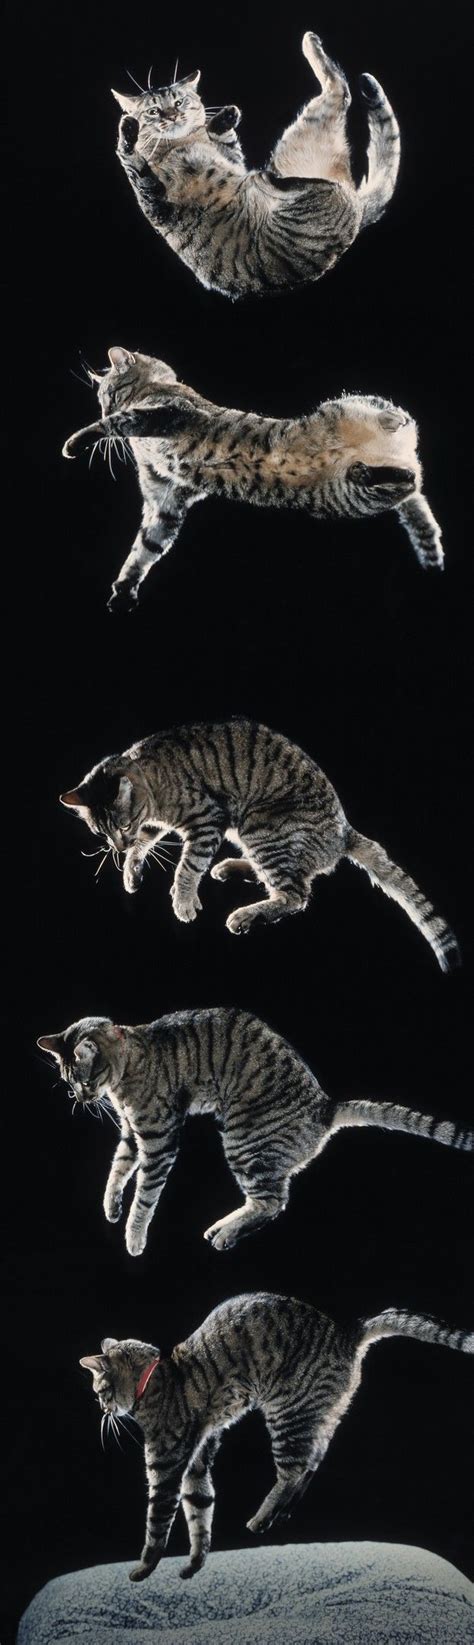 Cat Falling Cat Anatomy Cat Reference Cat Facts